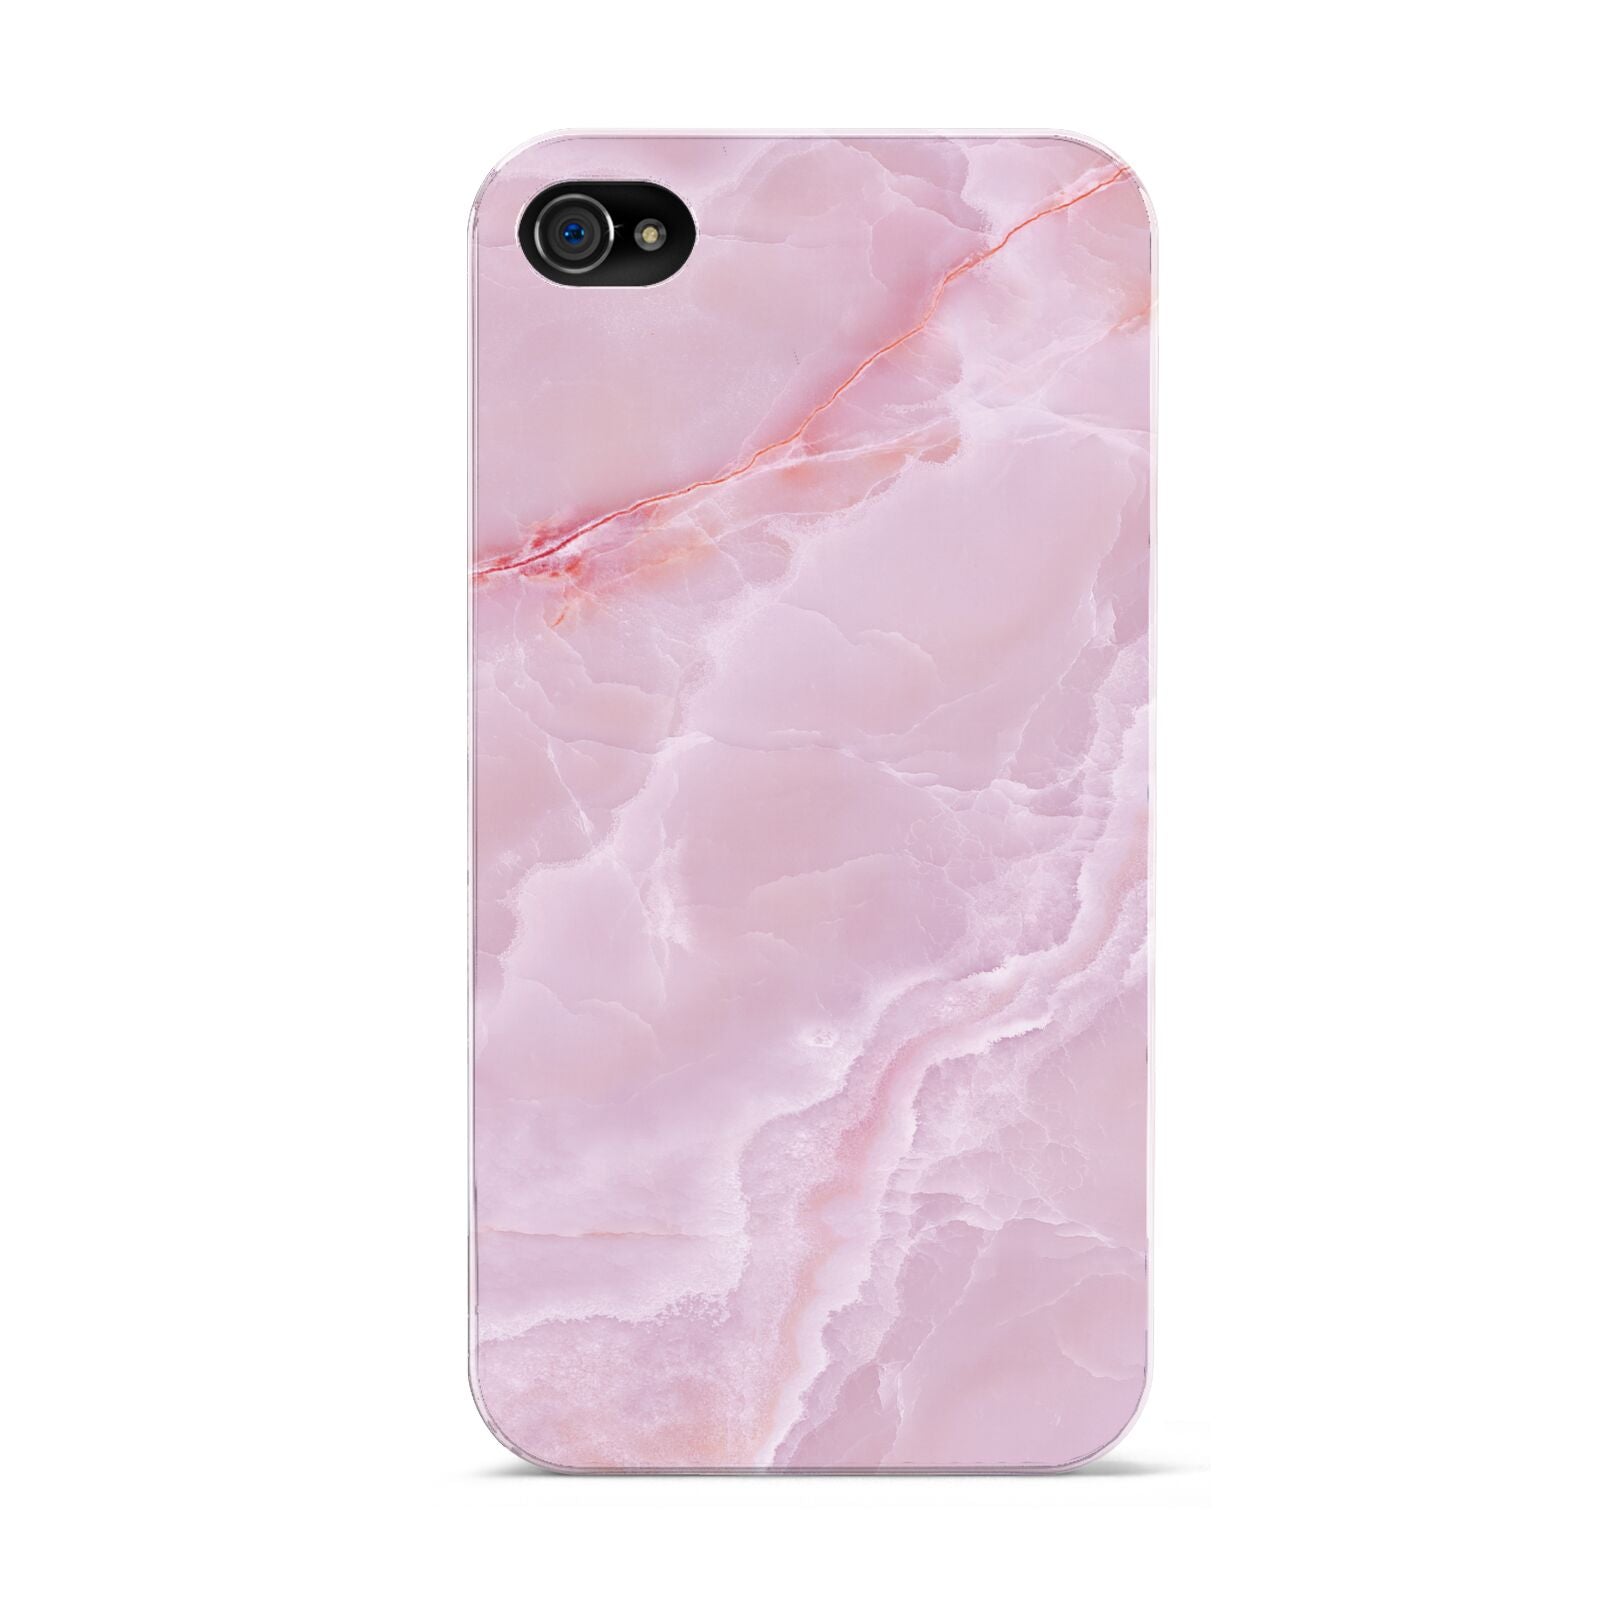 Dreamy Pink Marble Apple iPhone 4s Case